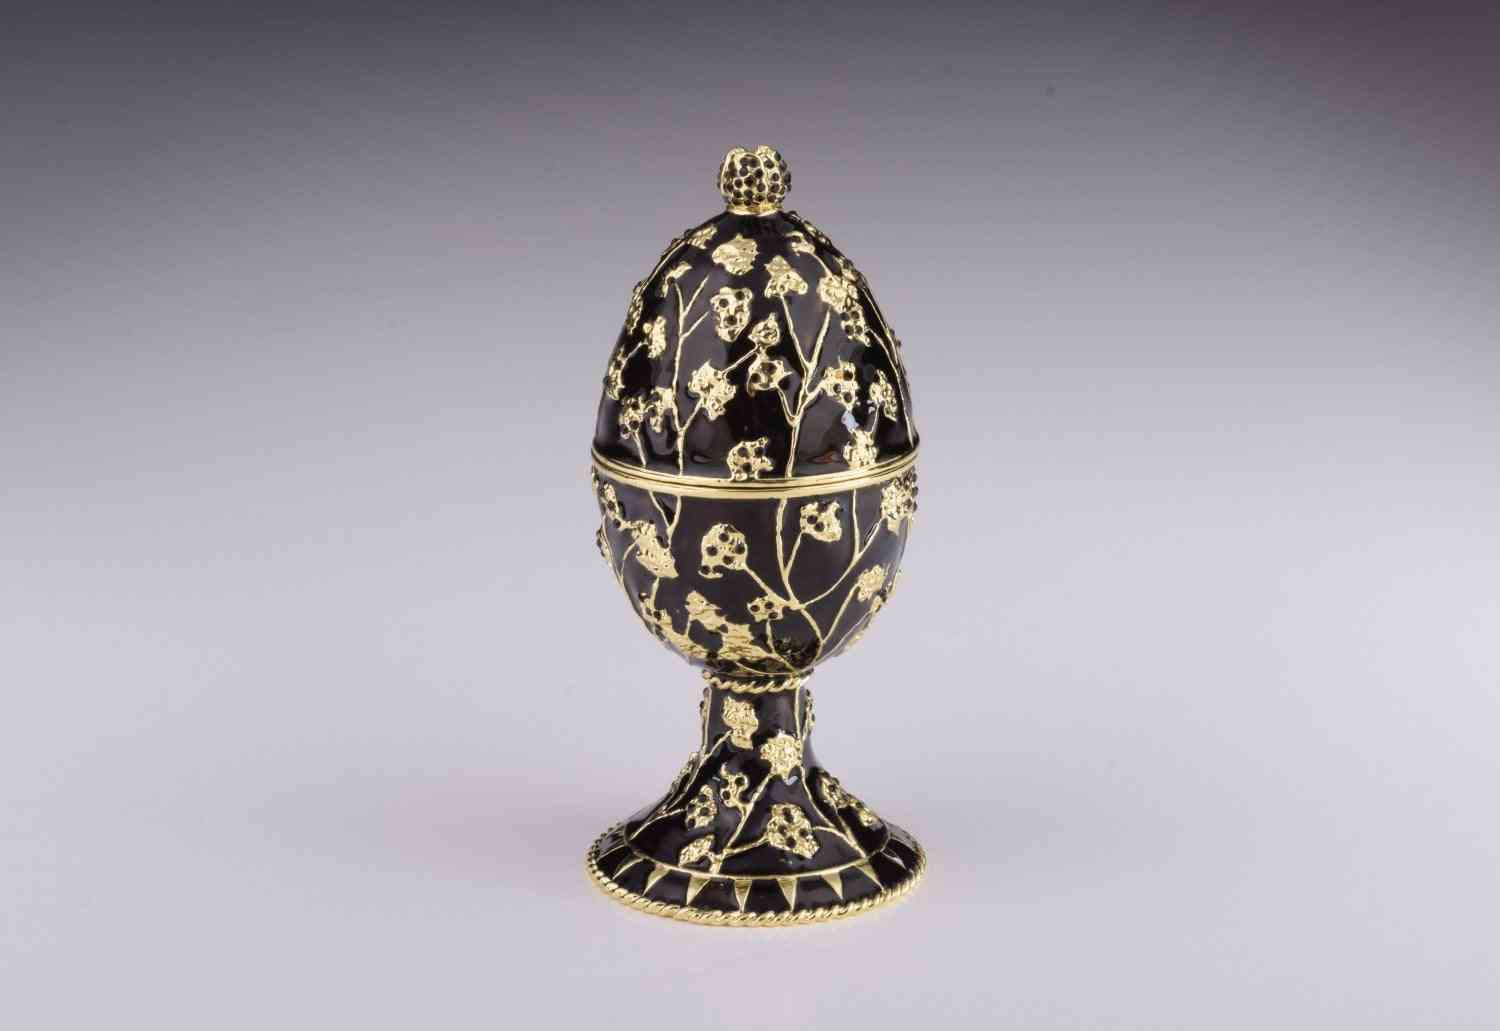 Black Faberge Egg With Silver Frog Surprise Inside